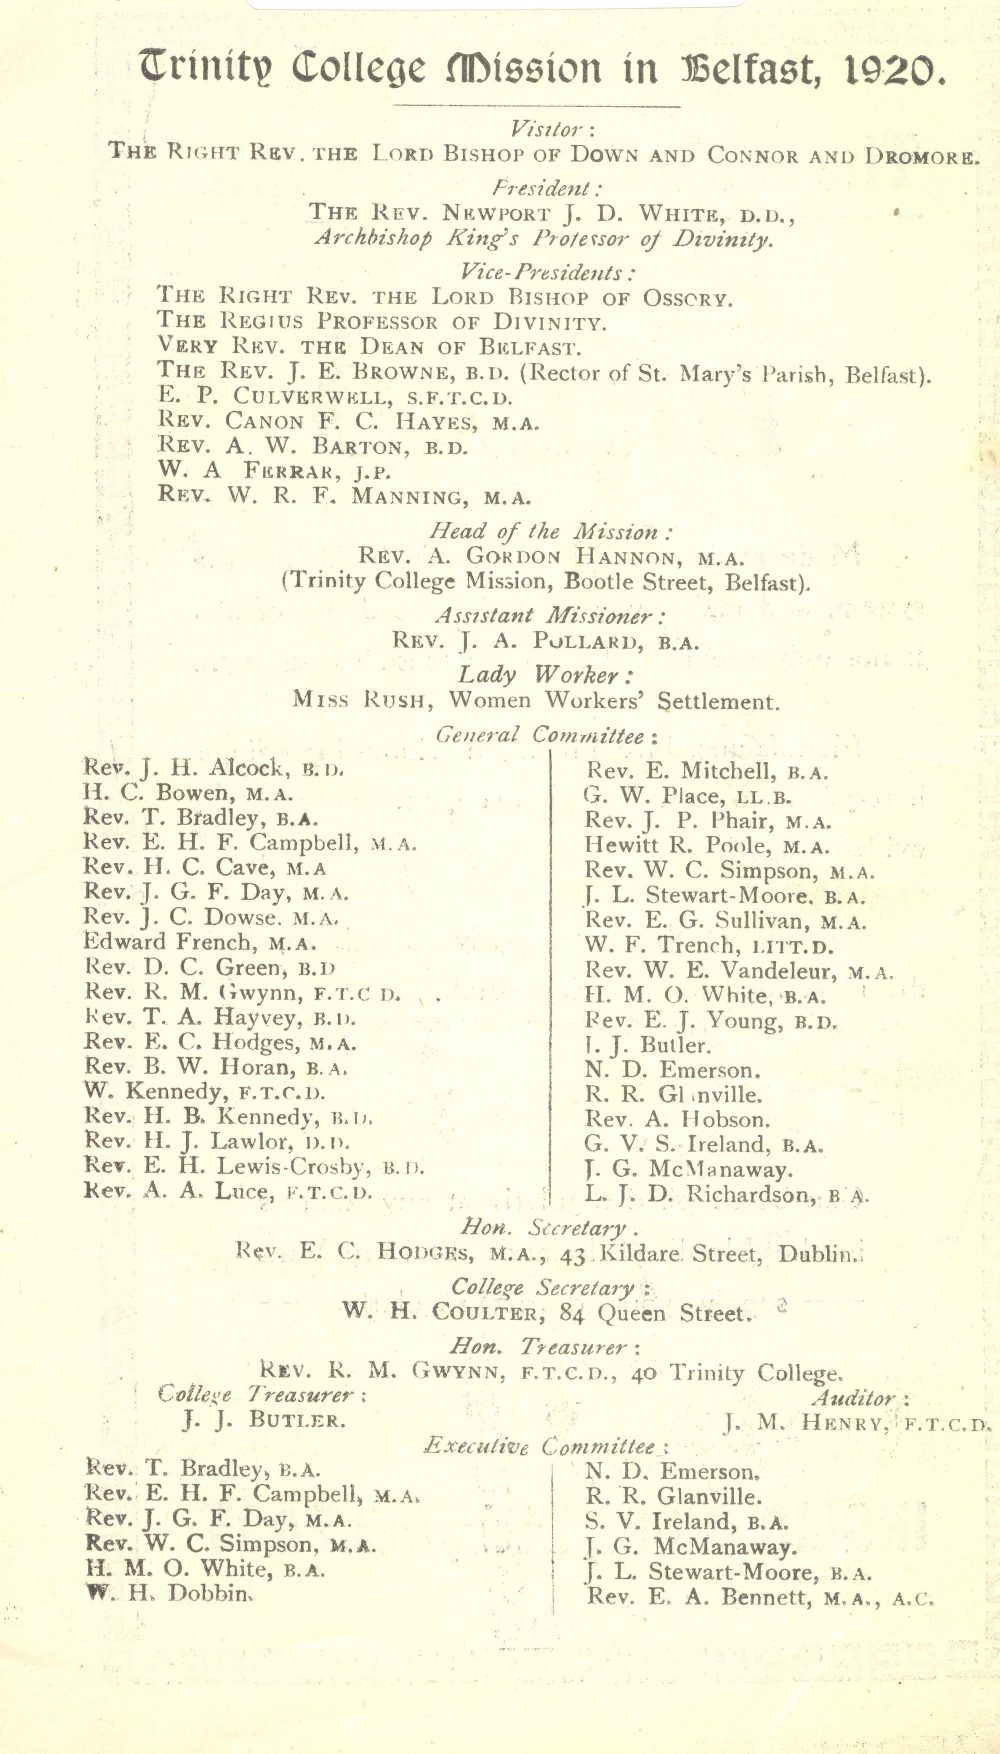 Officers and committee of the Mission, as published in Trinity College Mission in Belfast, 1920: A Short Story of its Origin, its Growth, its Prospects (Dublin, 1920)